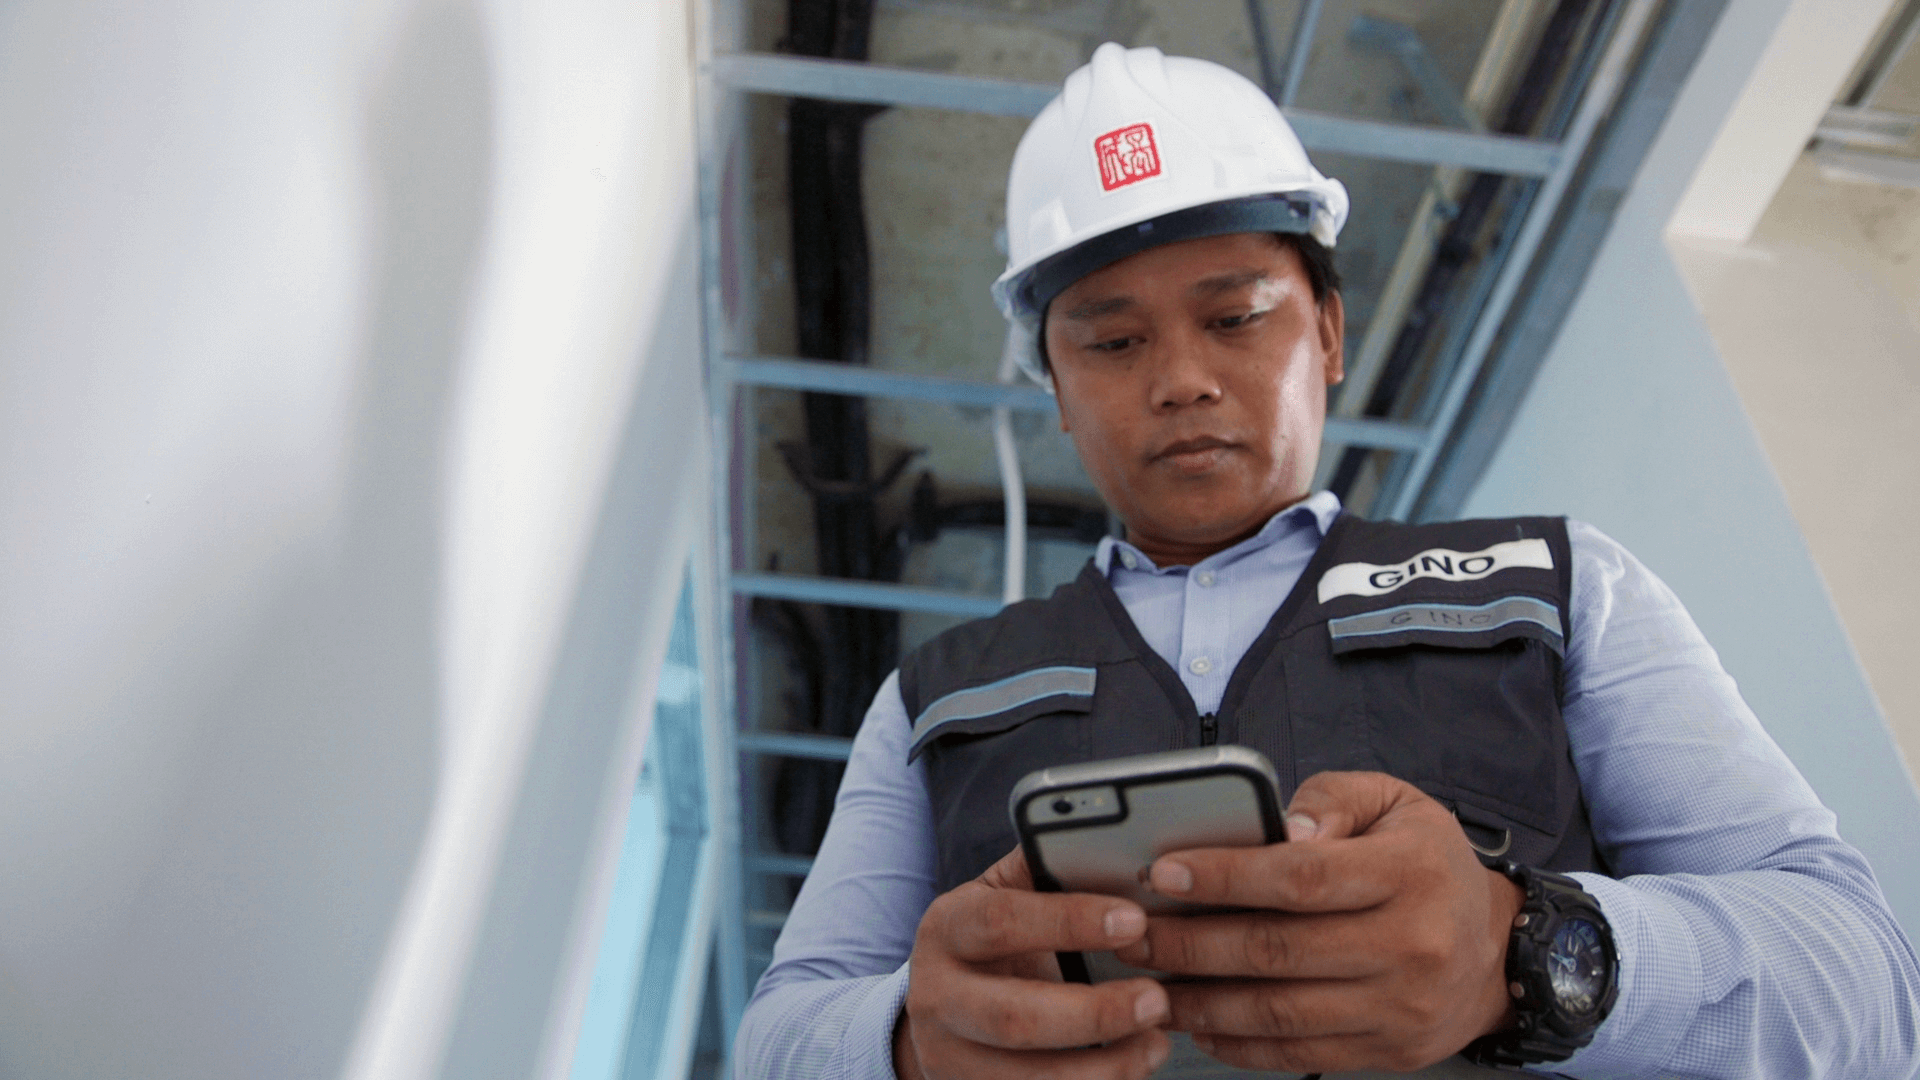 Tiong Seng Contractors believes in the power of digitalisation